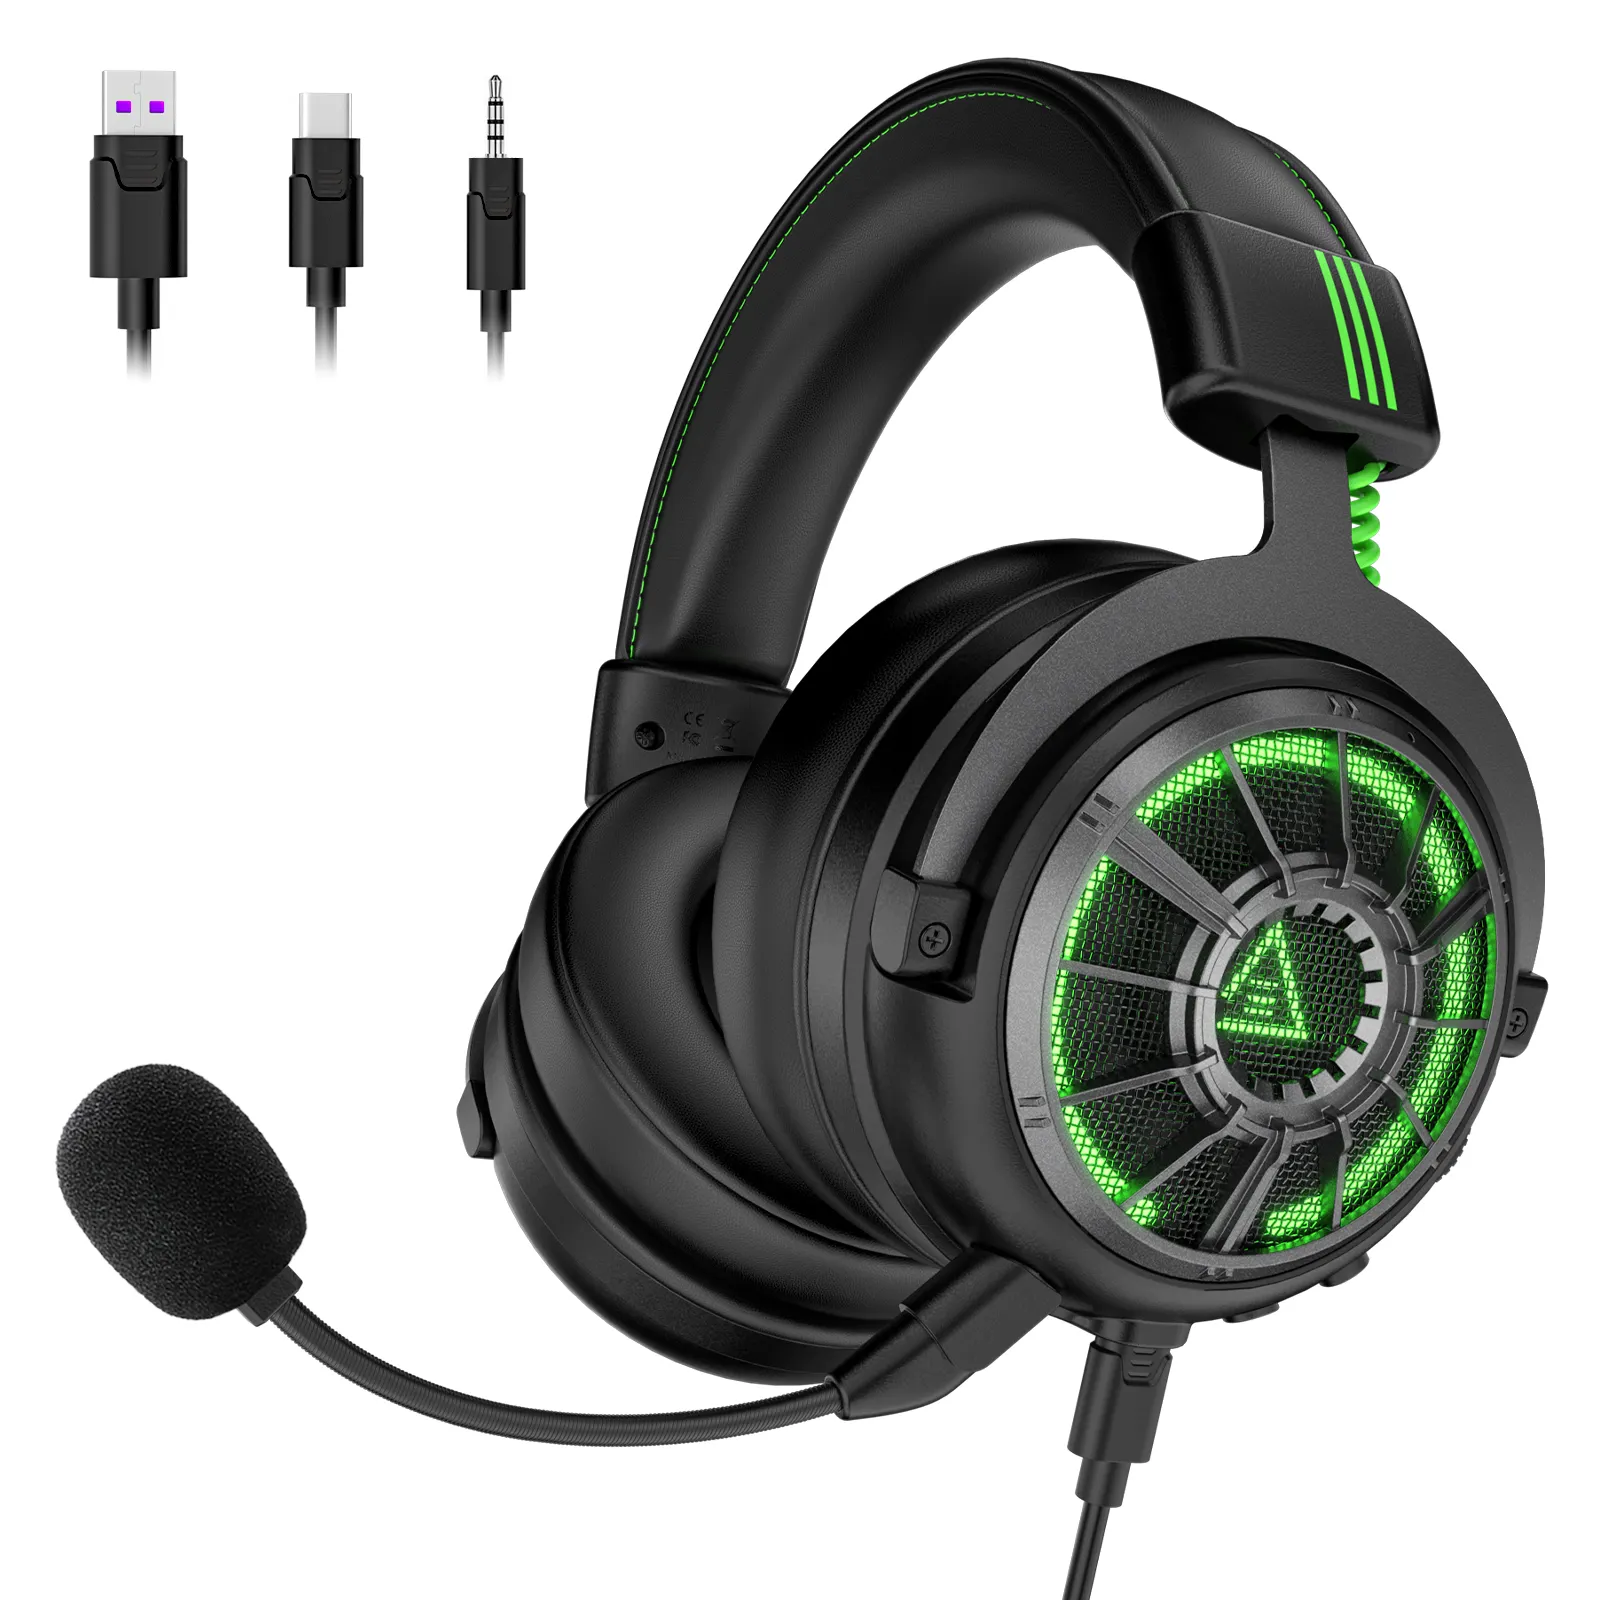 Nieuwe Headset Voor Pc Mobiele PS4 Xbox Eksa E5000 Pro Starengine 3in1 7.1 Sound Wired Gaming Headset Met Groene Led licht